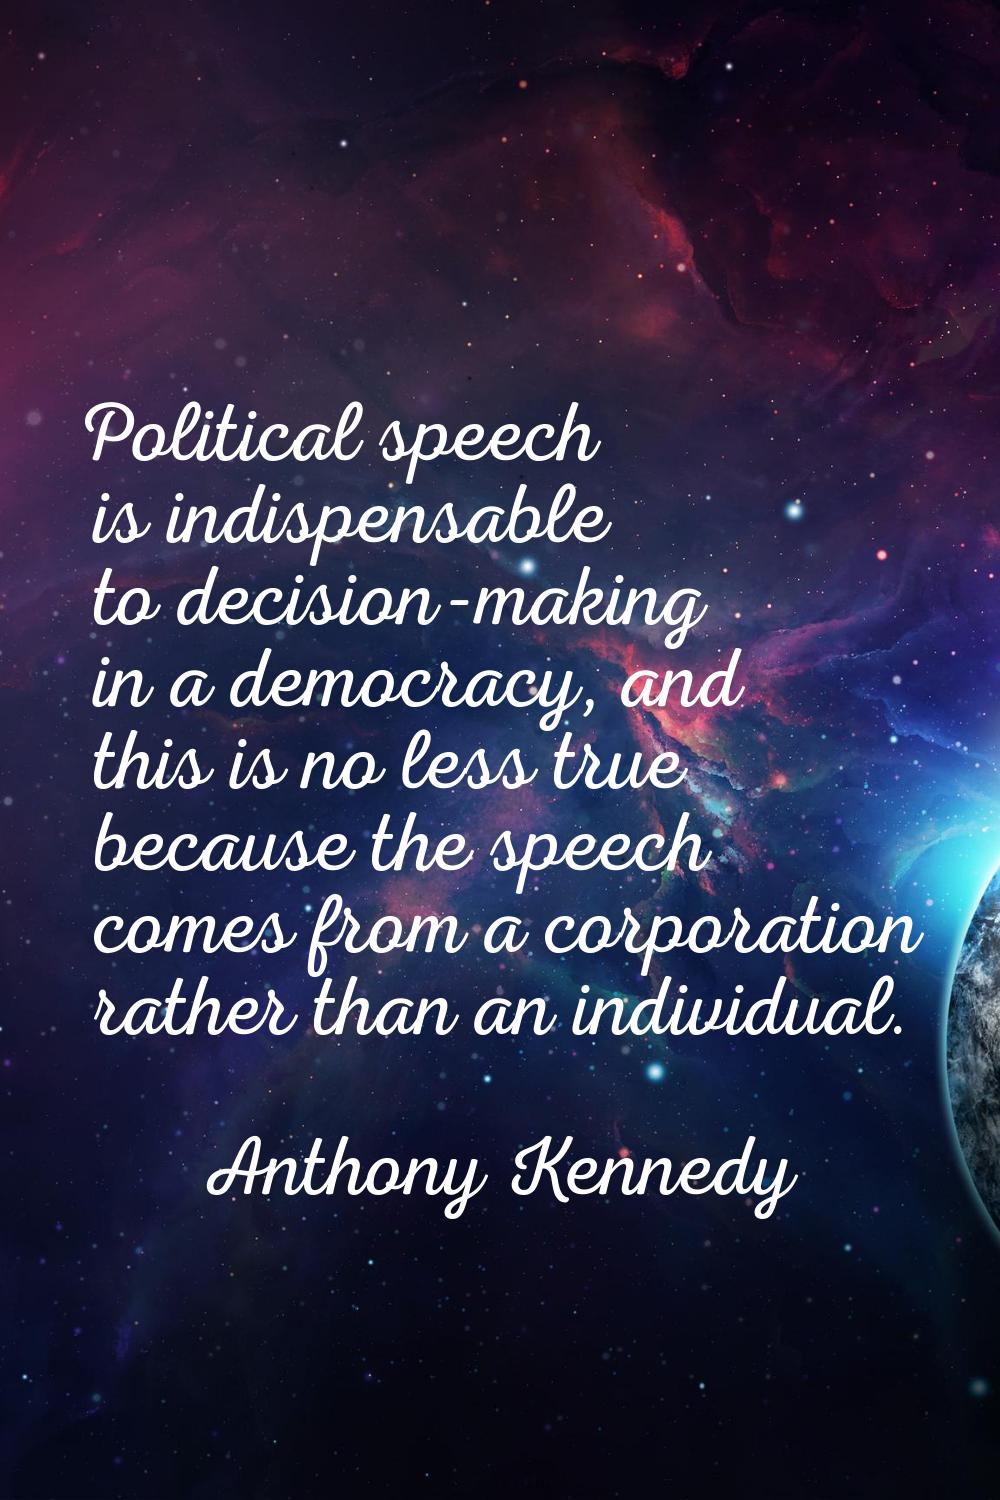 Political speech is indispensable to decision-making in a democracy, and this is no less true becau